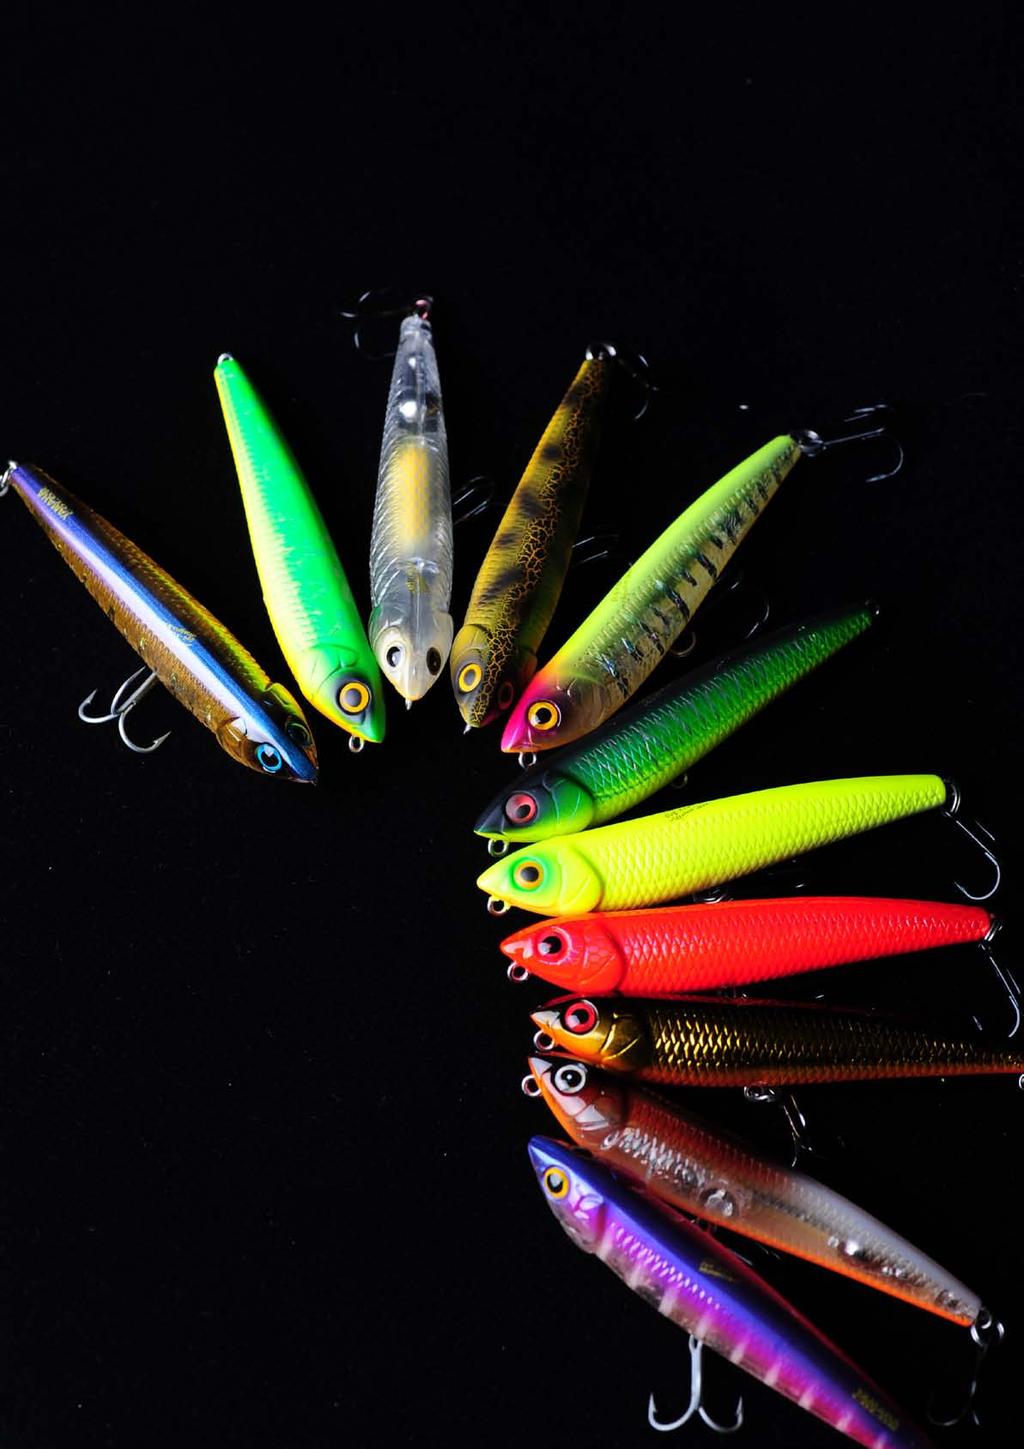 It s Time To Catch The Big Ones! Purveyor Of Fine Lures Inviting Friends For A Fishing Trip? Try POCode www.facebook.com/guvnorsgear www.